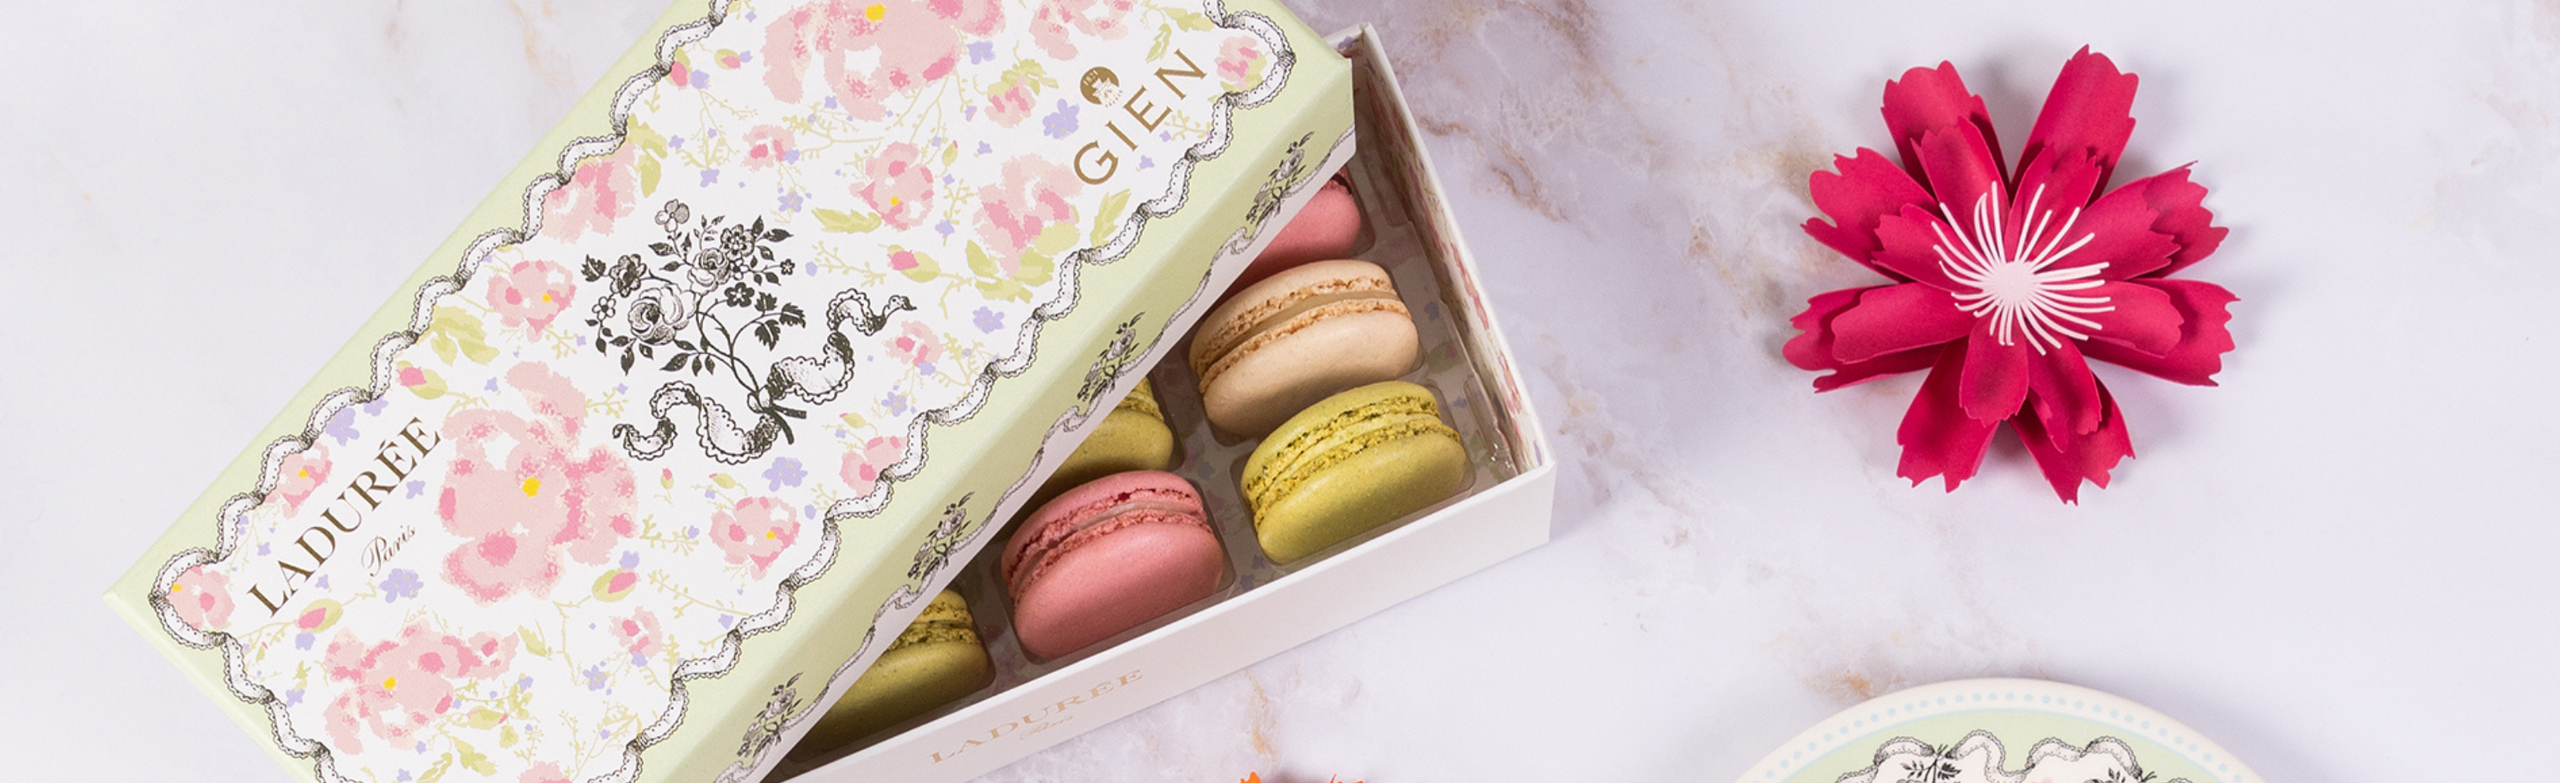 Celebrate summer with our Ladurée x Gien macarons gift box